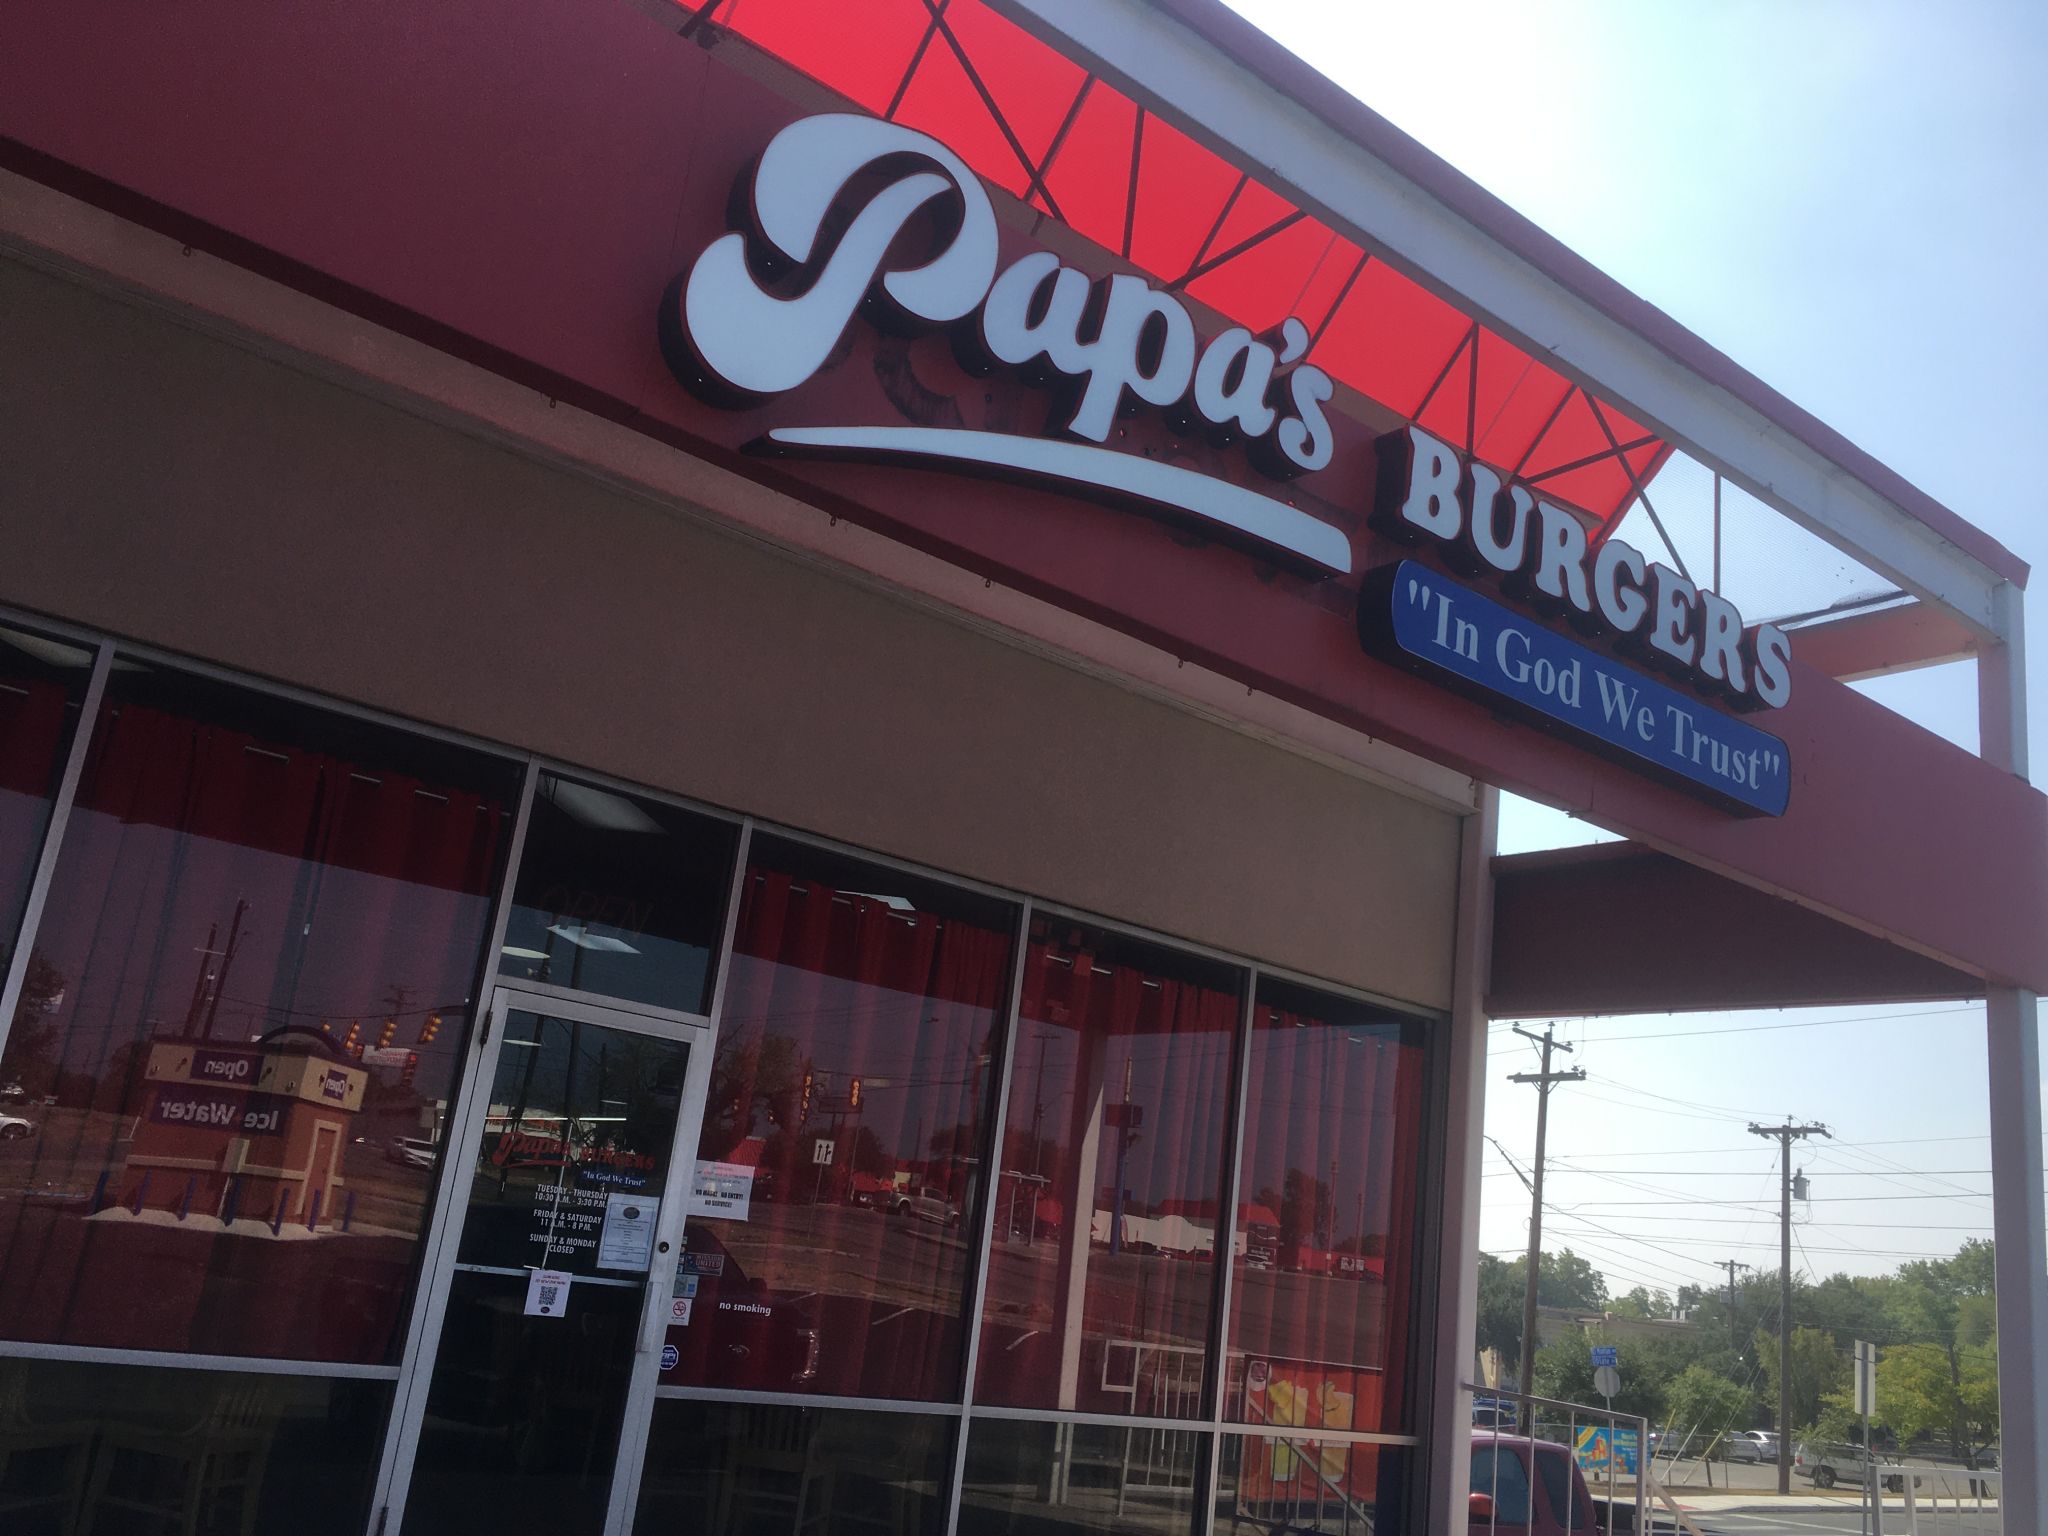 After trademark beef with Pappas, Texas burger joint changes its name